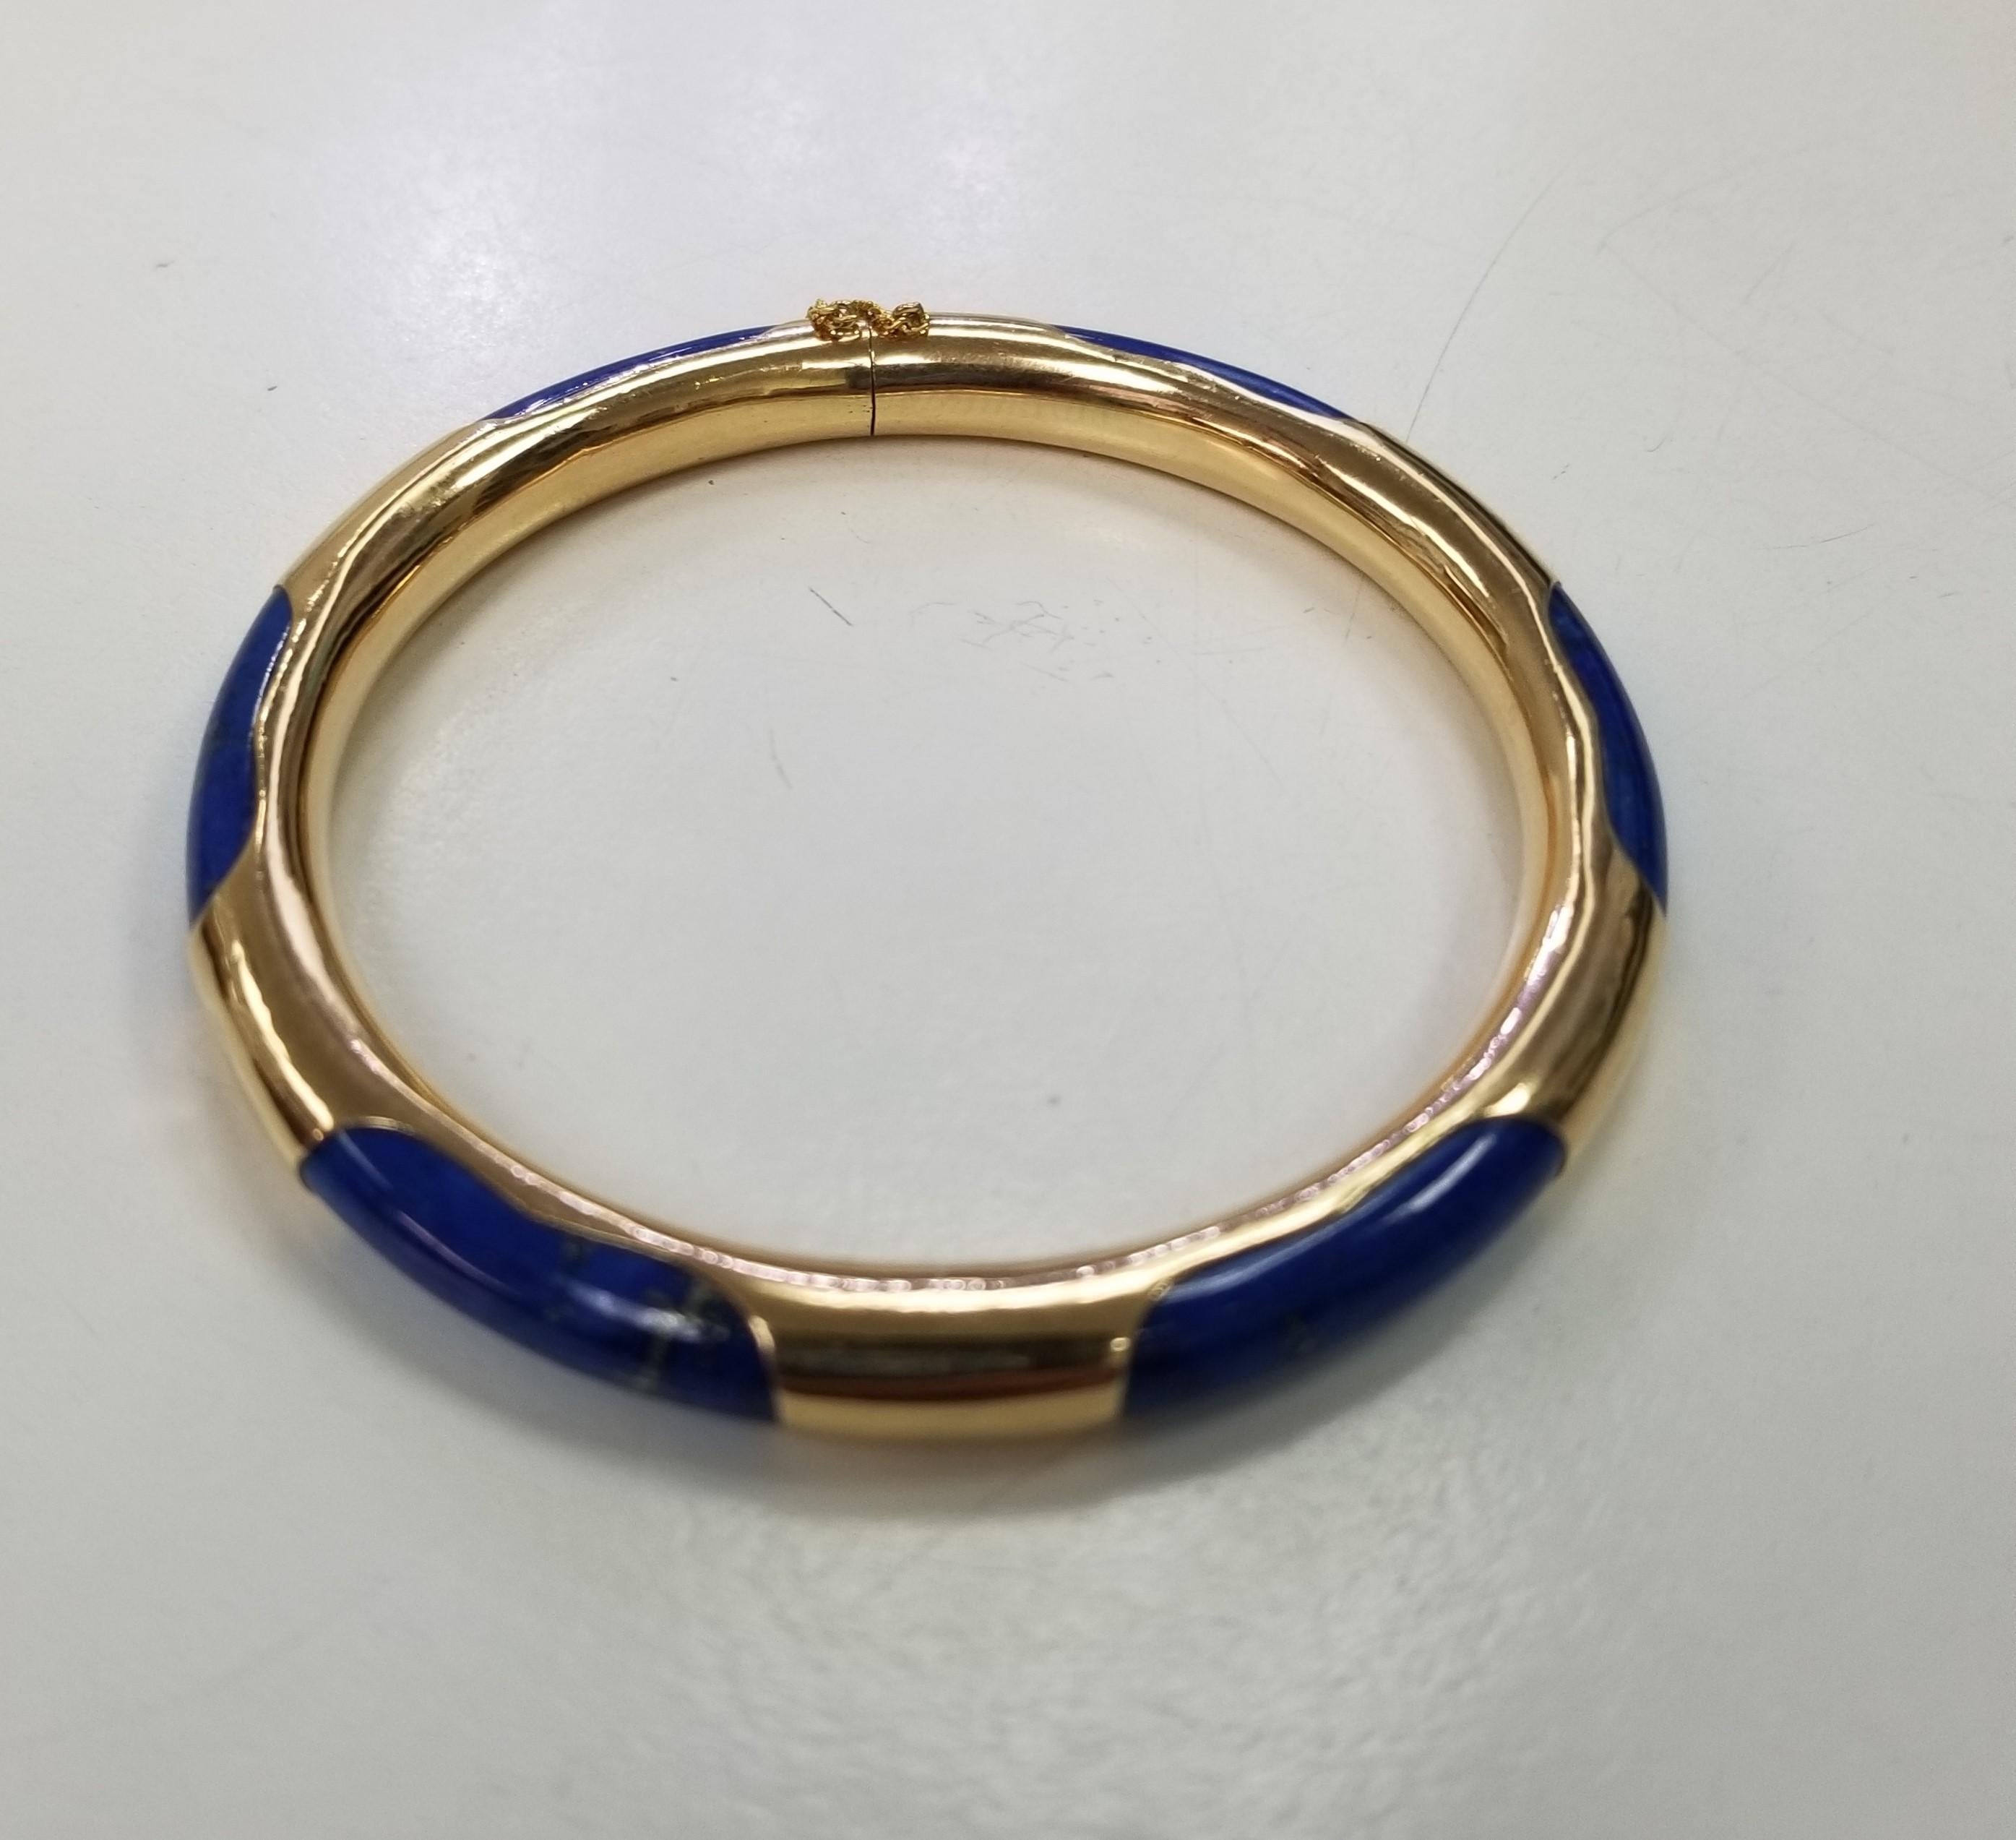 14k yellow gold and Lapis Lazuli stone bangle bracelet. Measures 2 1/4 inches inside diameter and 2 3/4 inches outside and 7.25mm wide. Weighs 21 grams. Stamped 14k, maker unknown. with safety chain.

